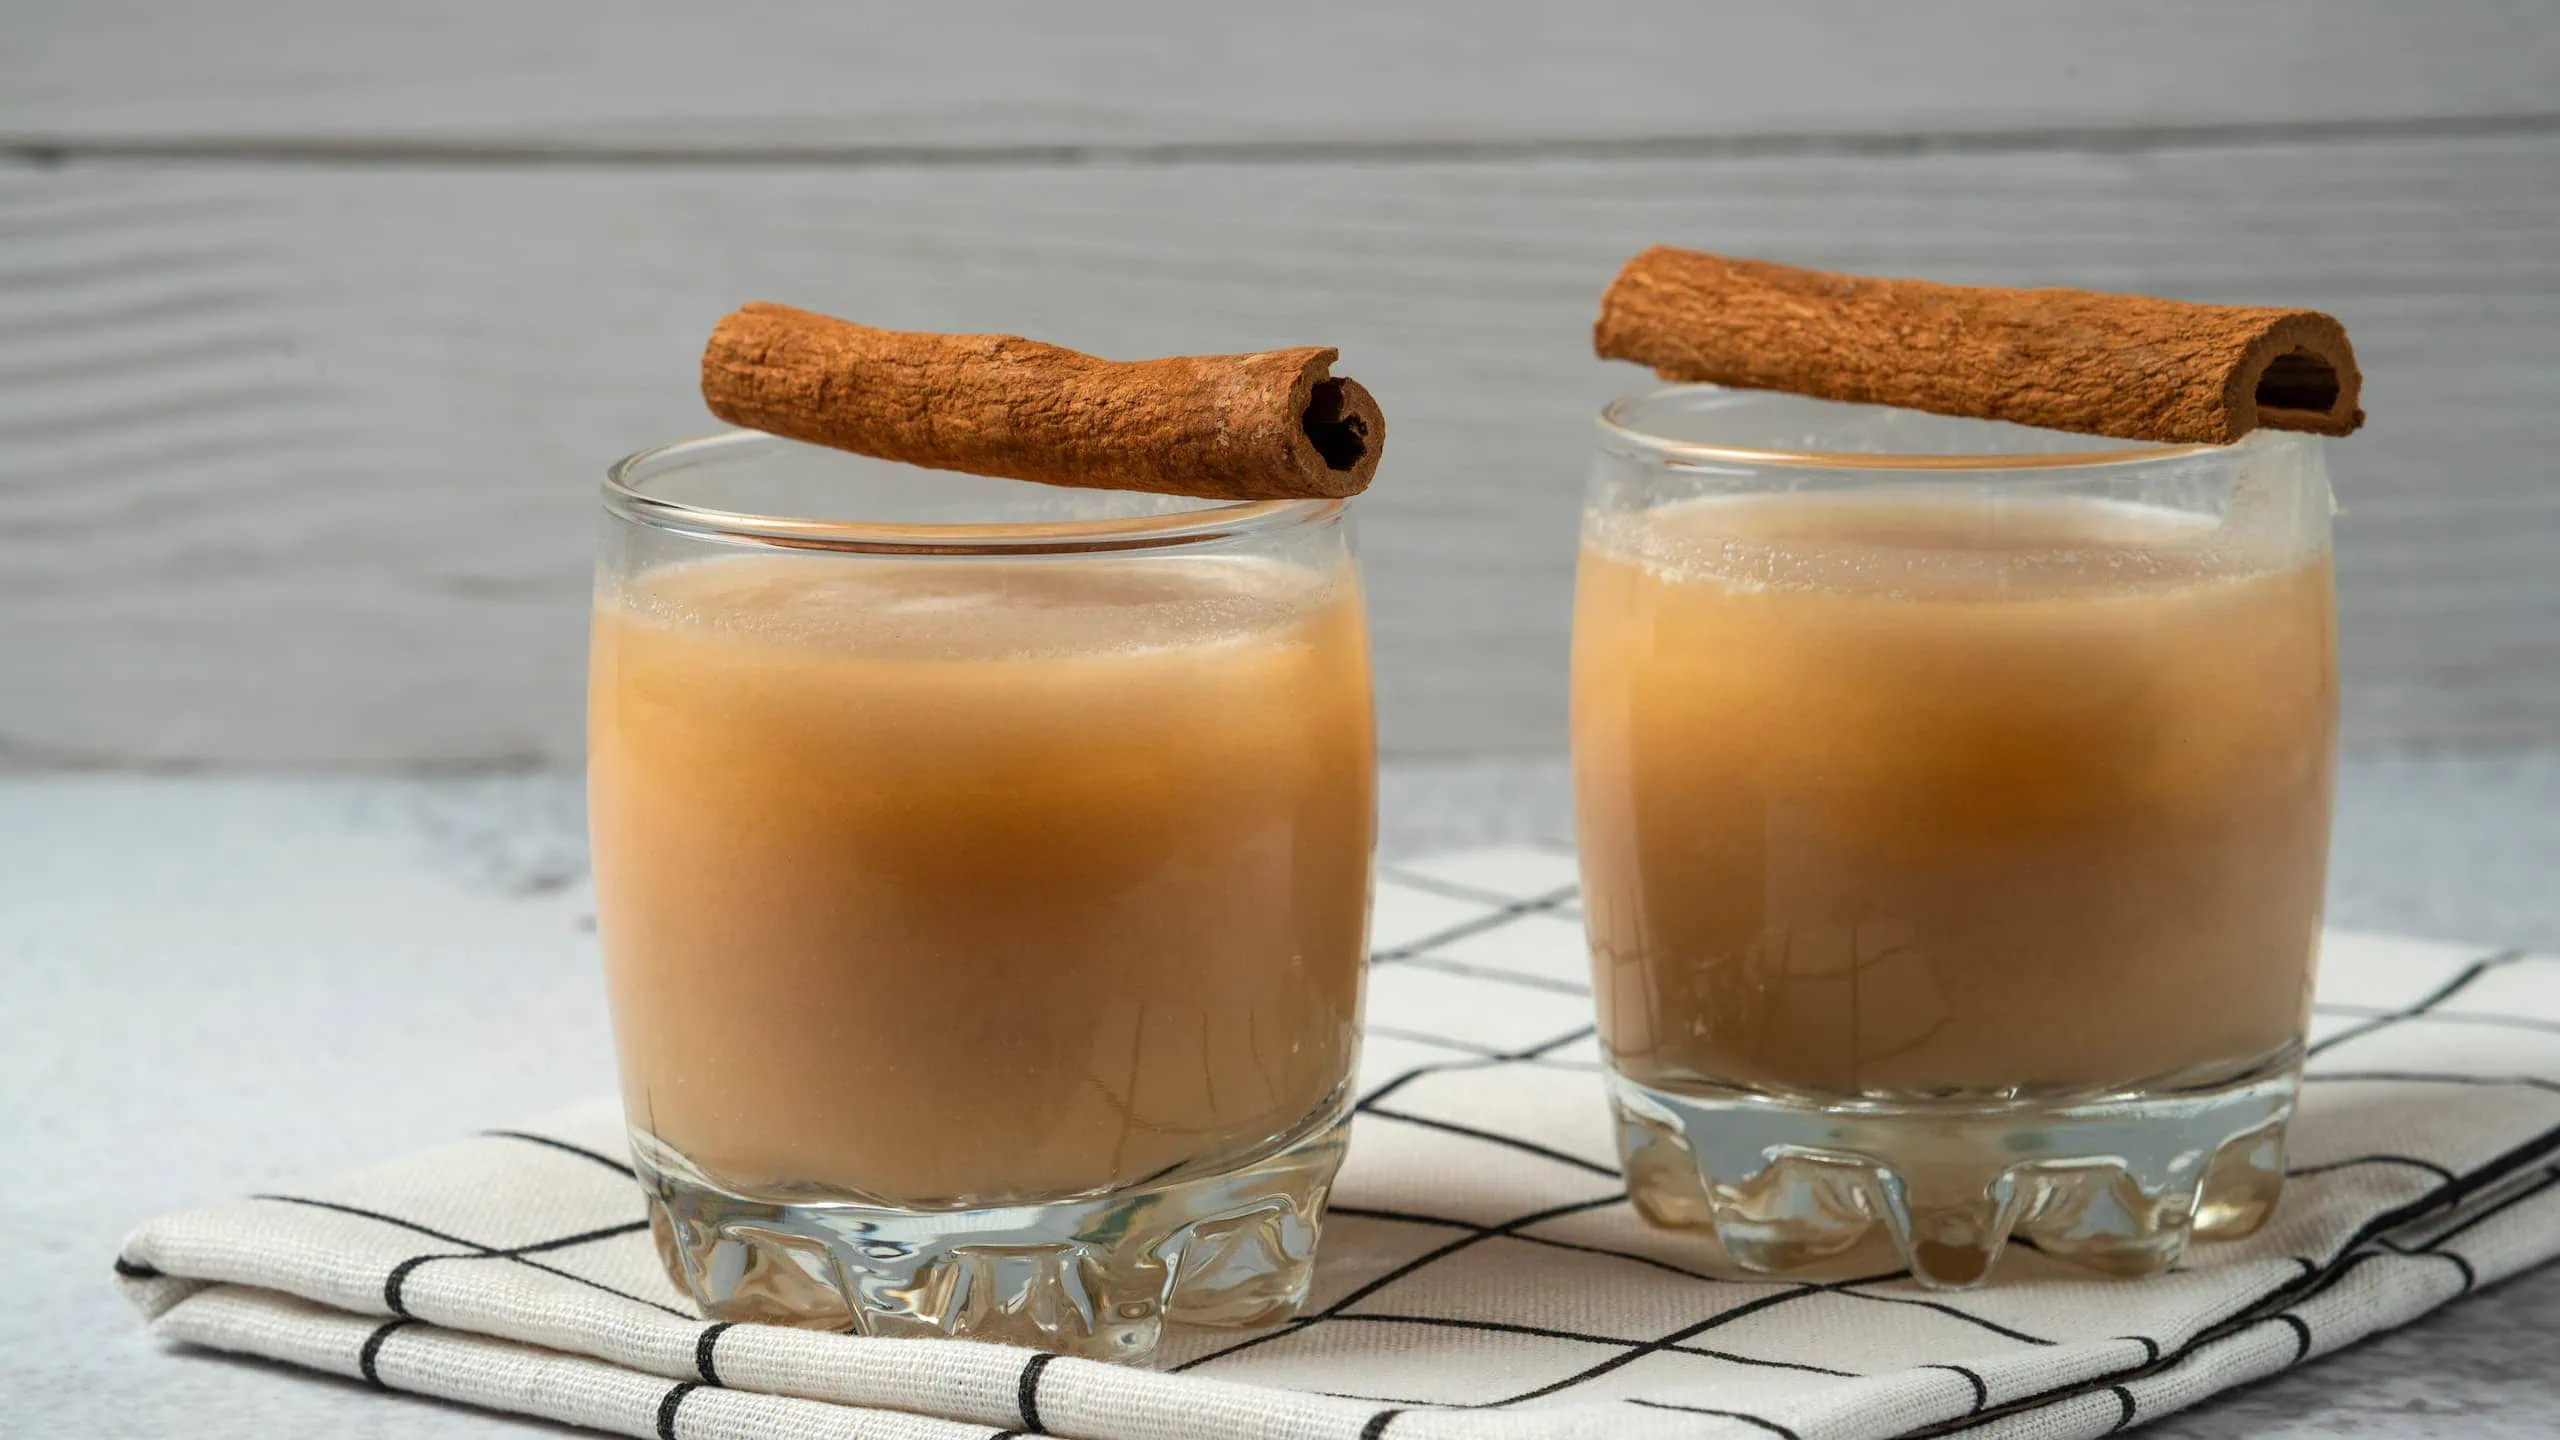 Our version of the Pioneer Woman's hot buttered rum